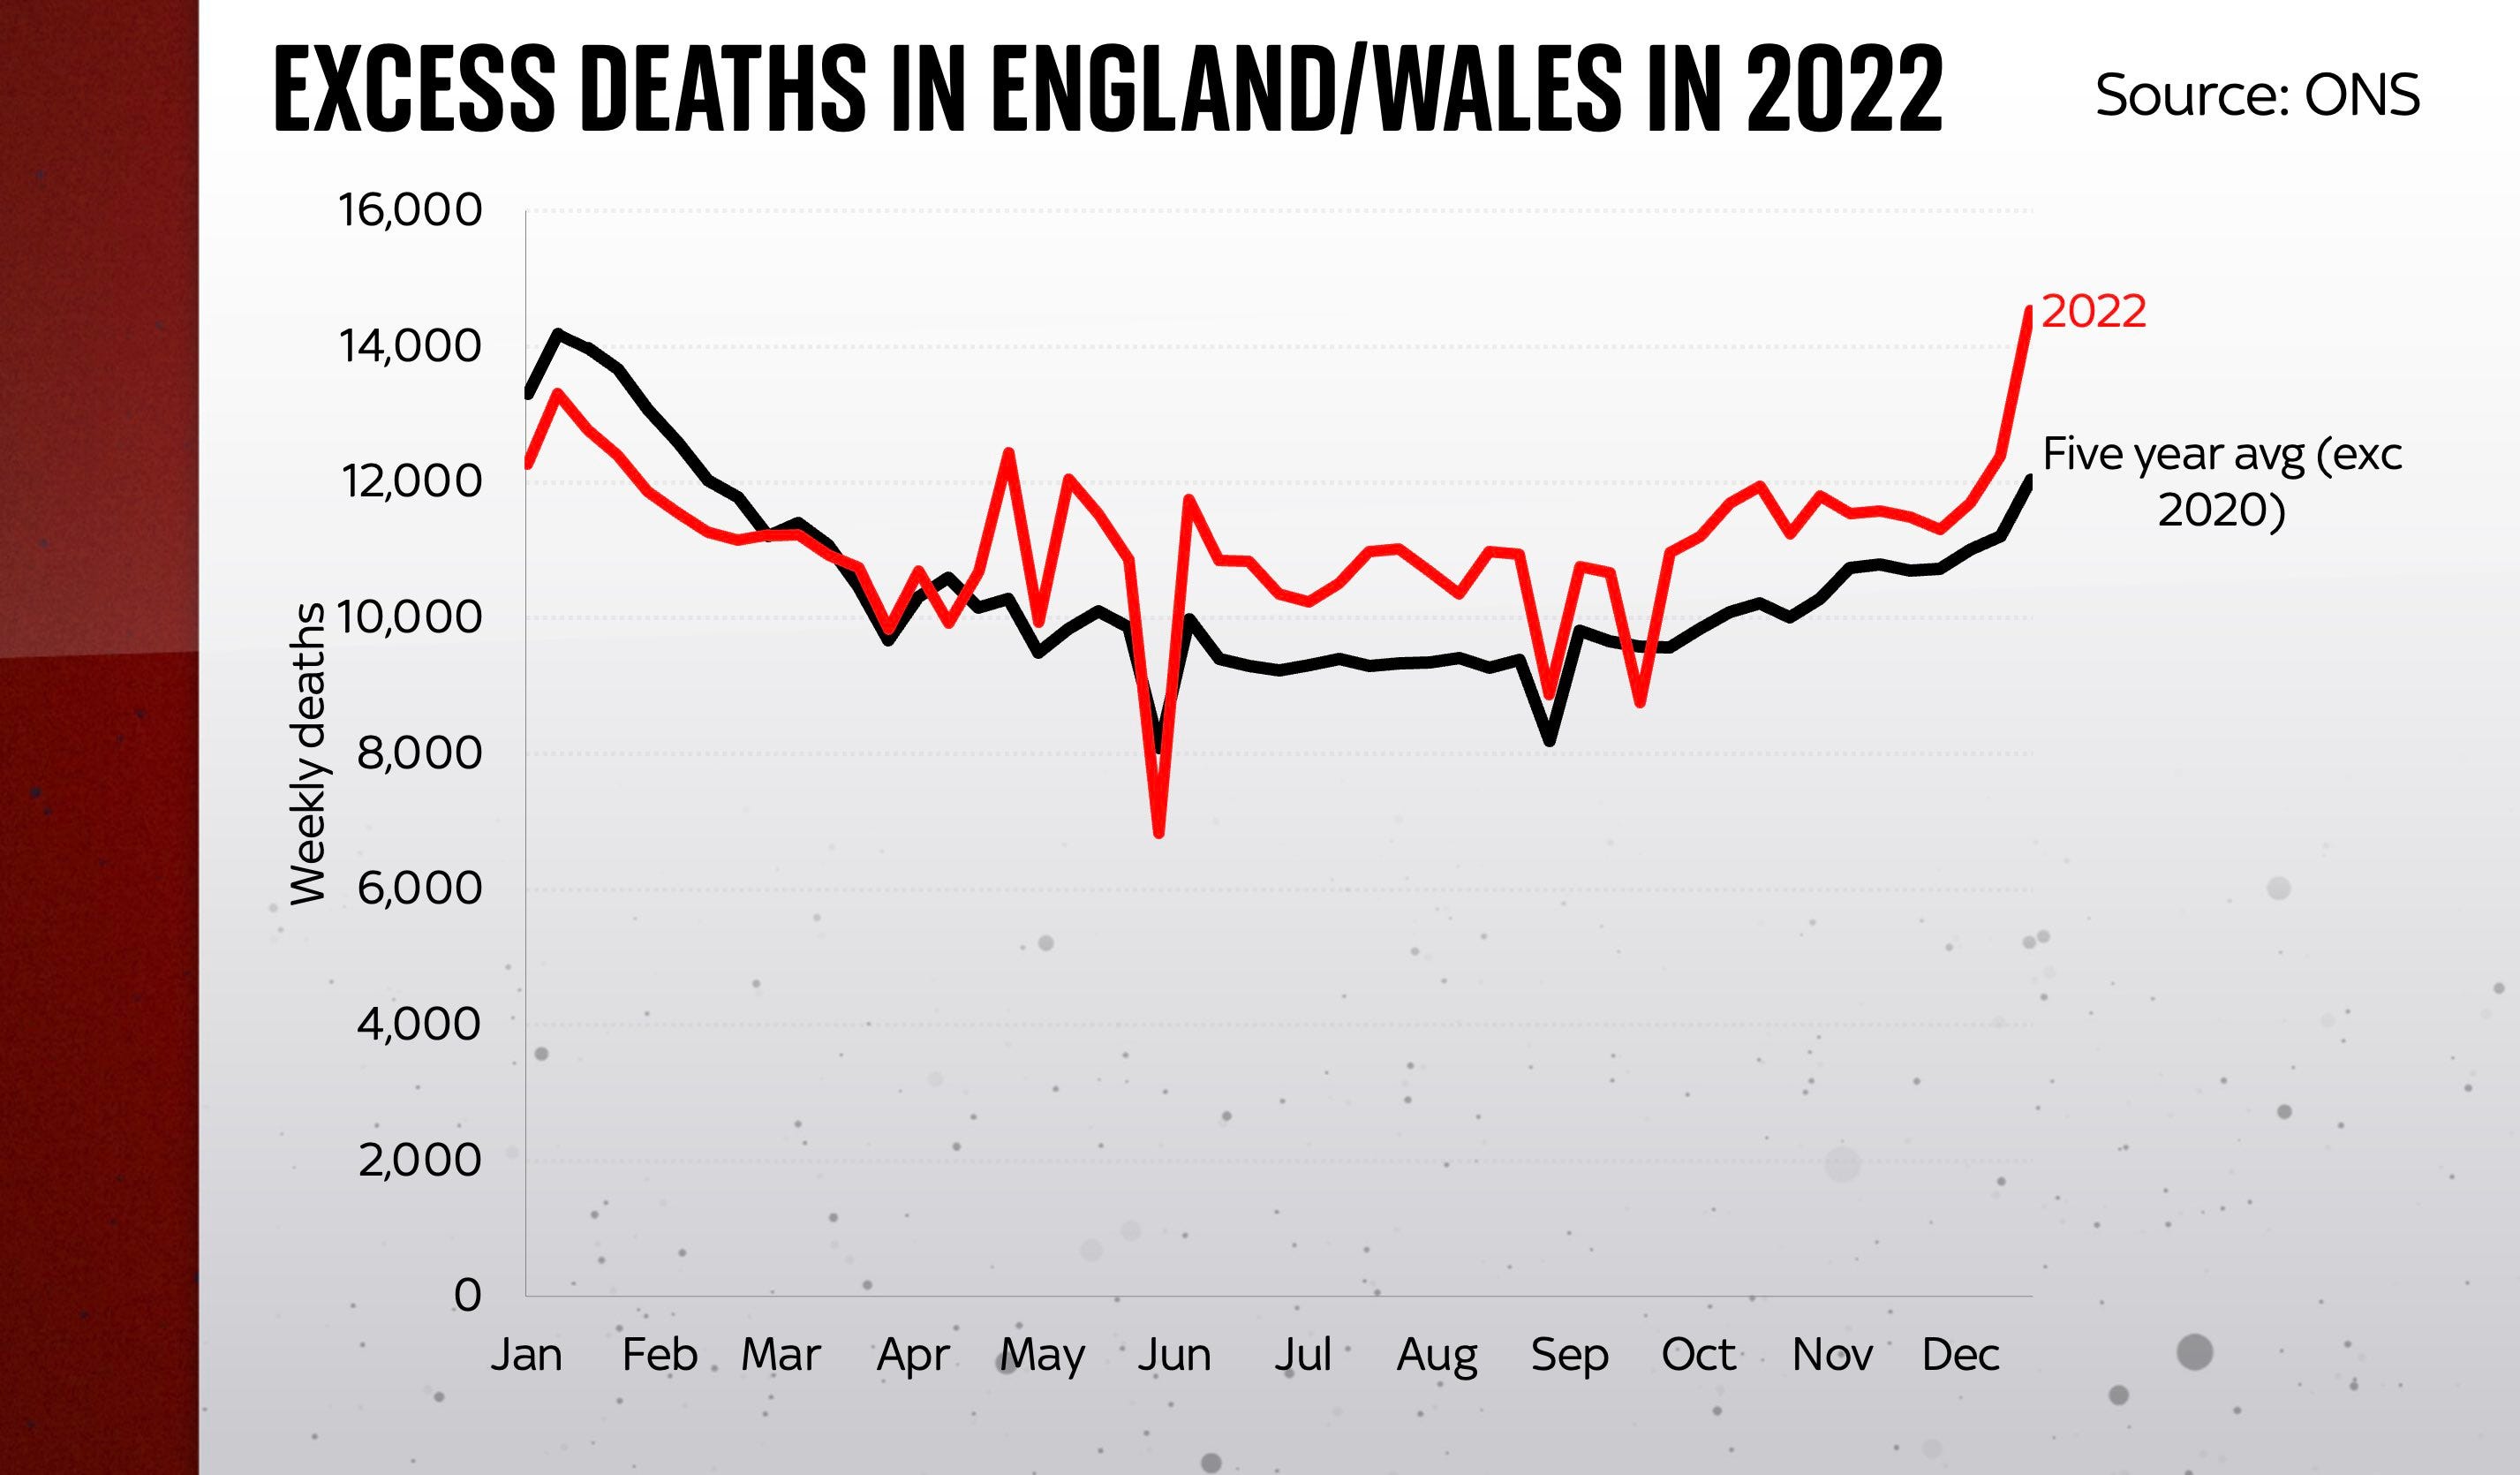 Excess Deaths in the UK continue to soar